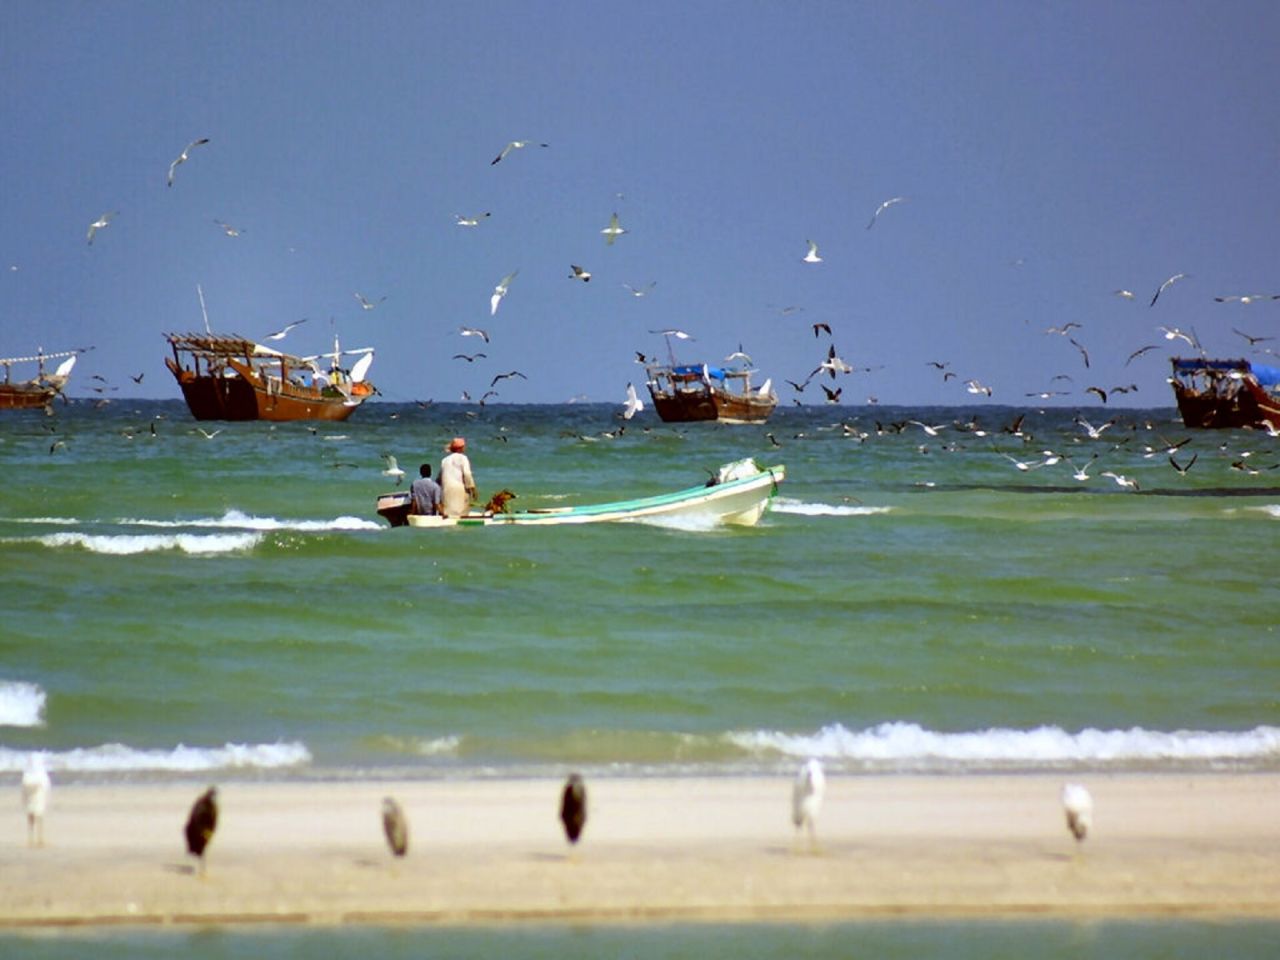 Fishermen head out into the waters around the town of Duqm in Oman.